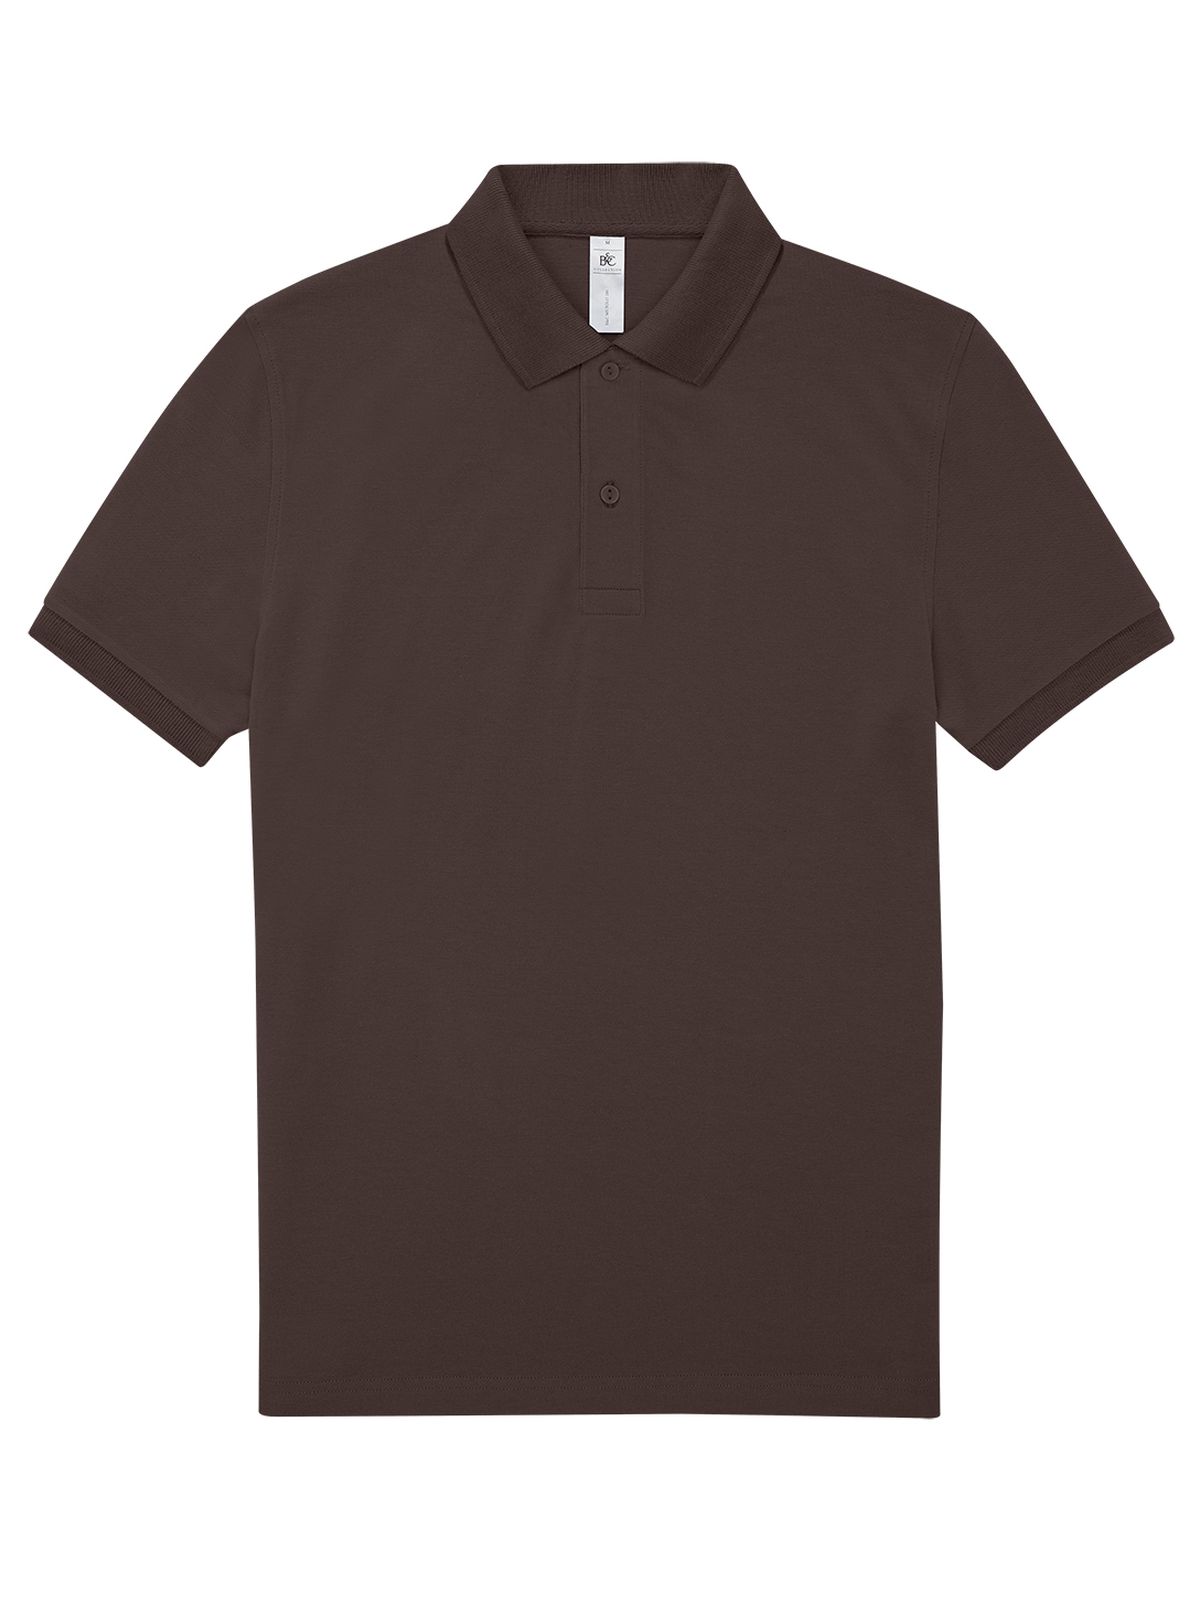 bc-my-polo-180-roasted-coffee.webp